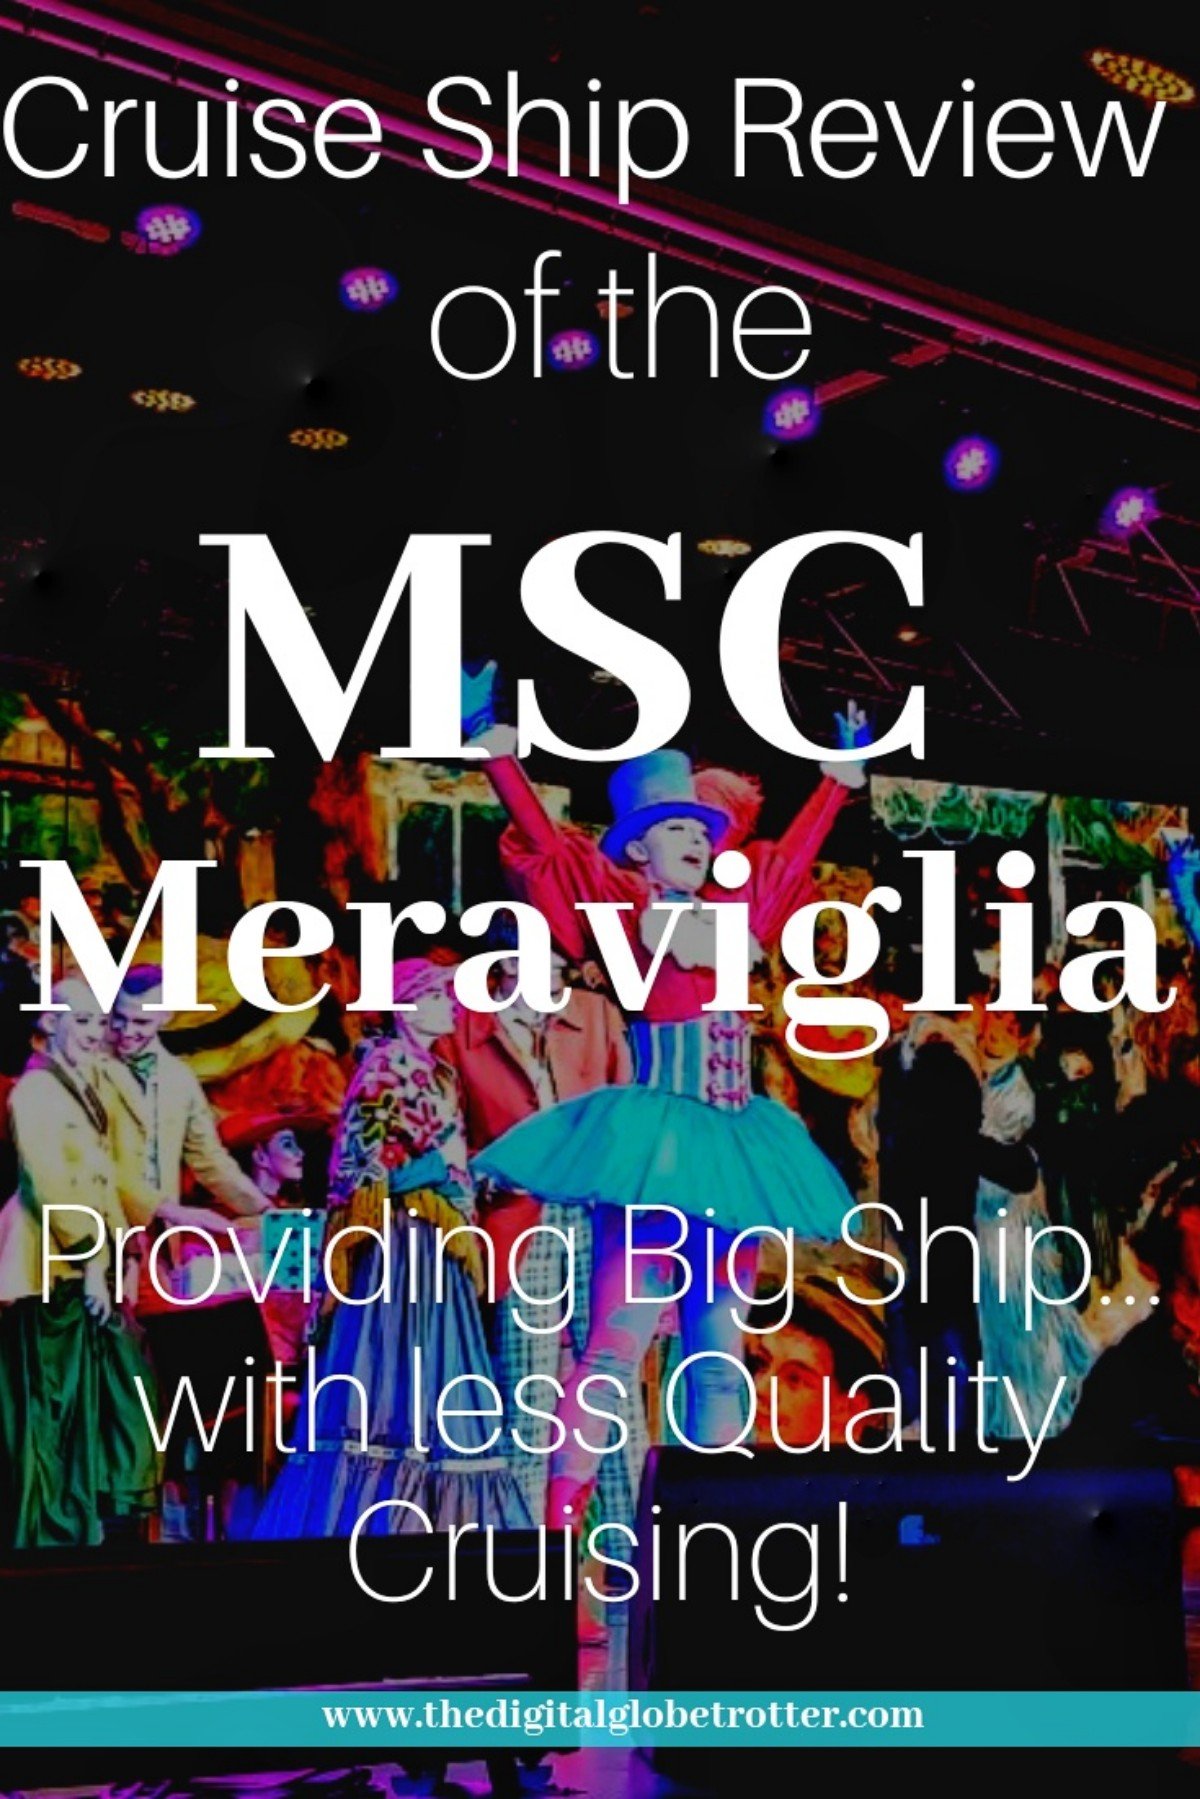 Review of the Msc Meraviglia #Cruising #cruiseships #MSC #royalcaribbean #ncl #cruises #holidays #vacations #mscmeraviglia #msccrocere